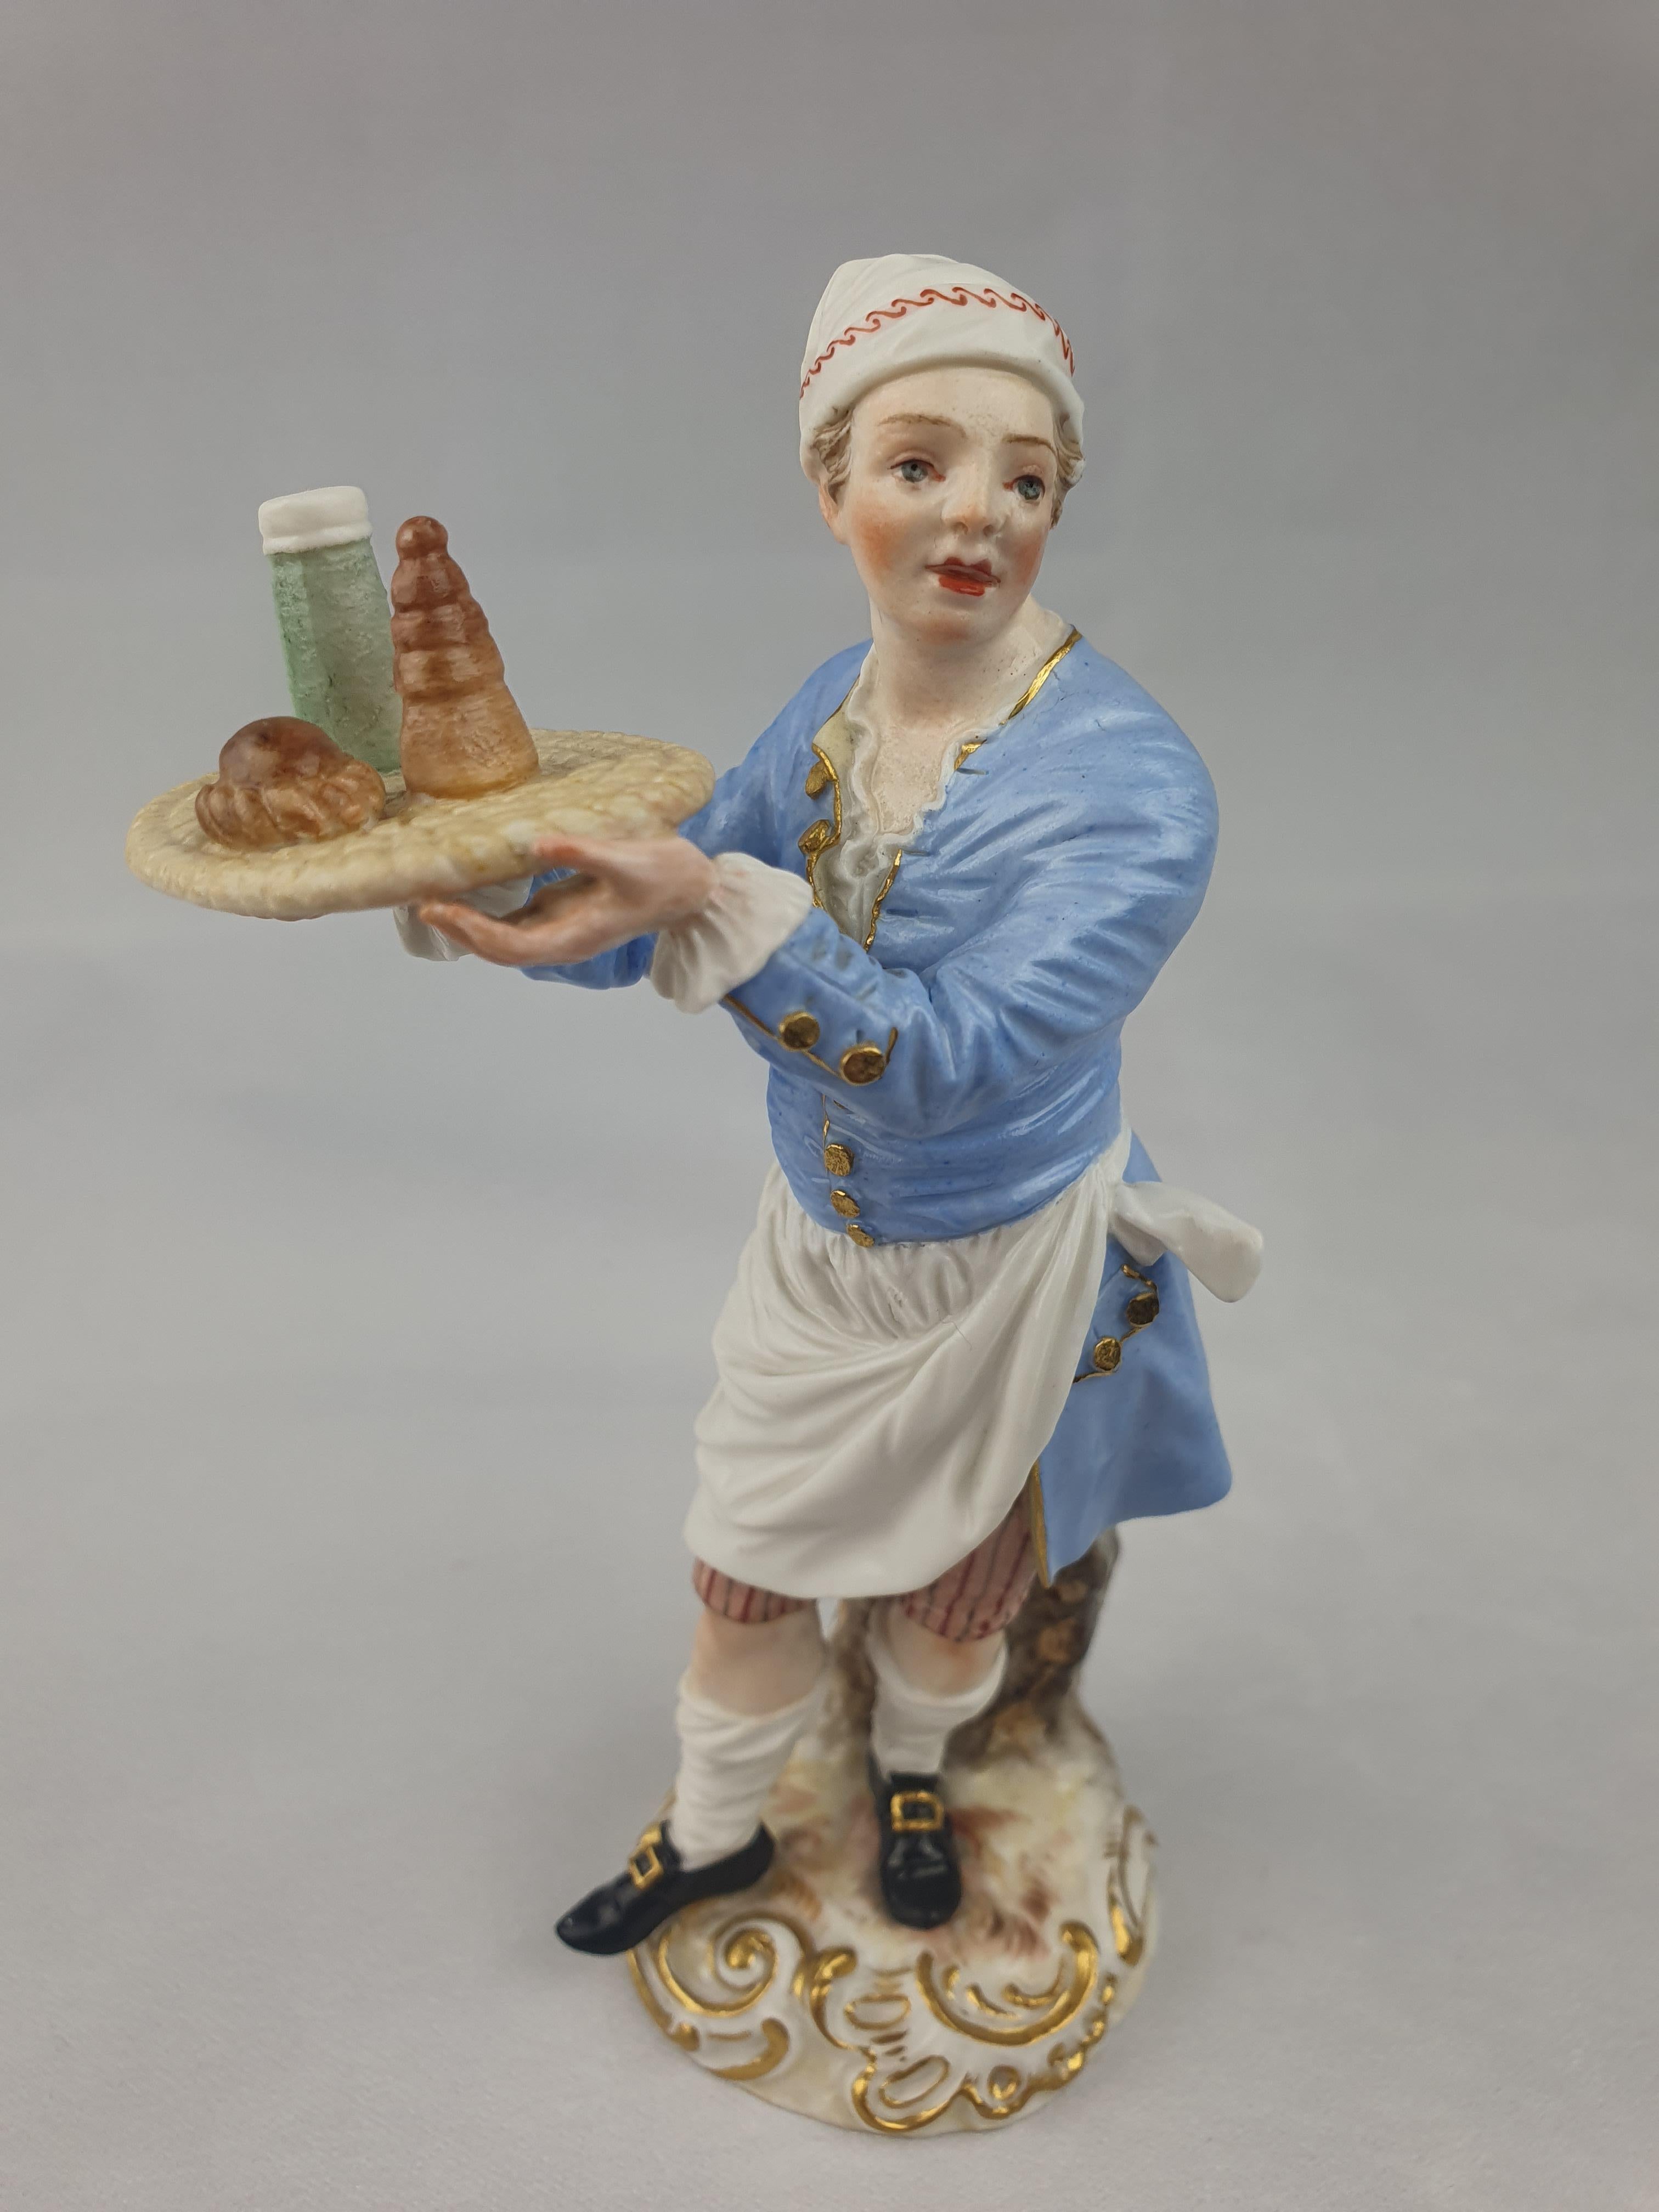 Late 19thc Meissen street trader waiter from the series of 35 figures known as the Cris of Paris.

Number 1
Height 13.5cm
Cross swords in underglaze blue
Circa 1880.